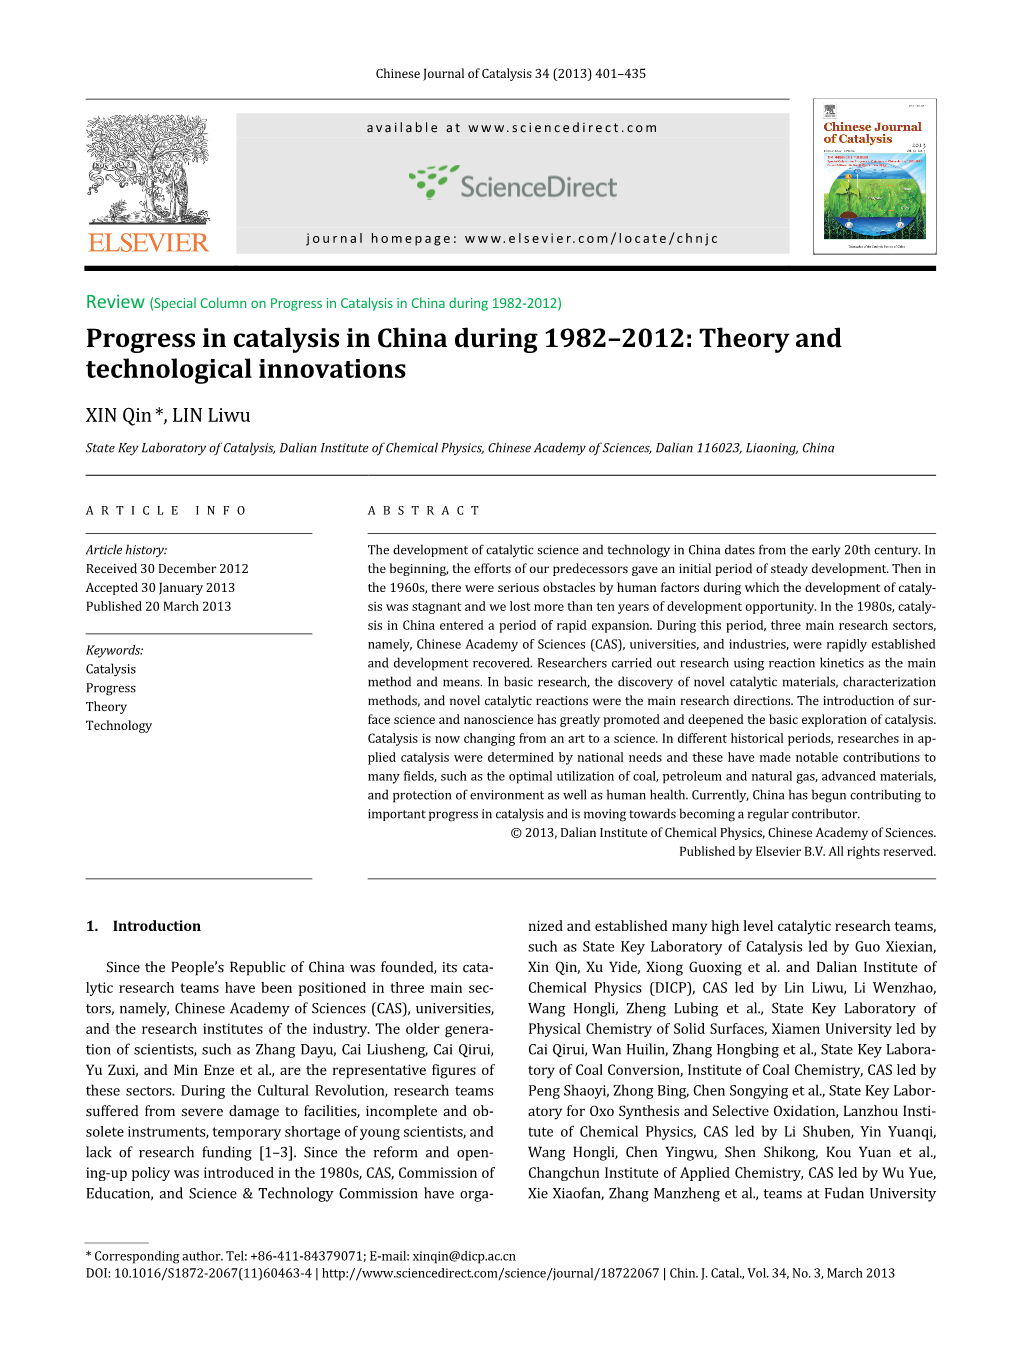 Theory and Technological Innovations